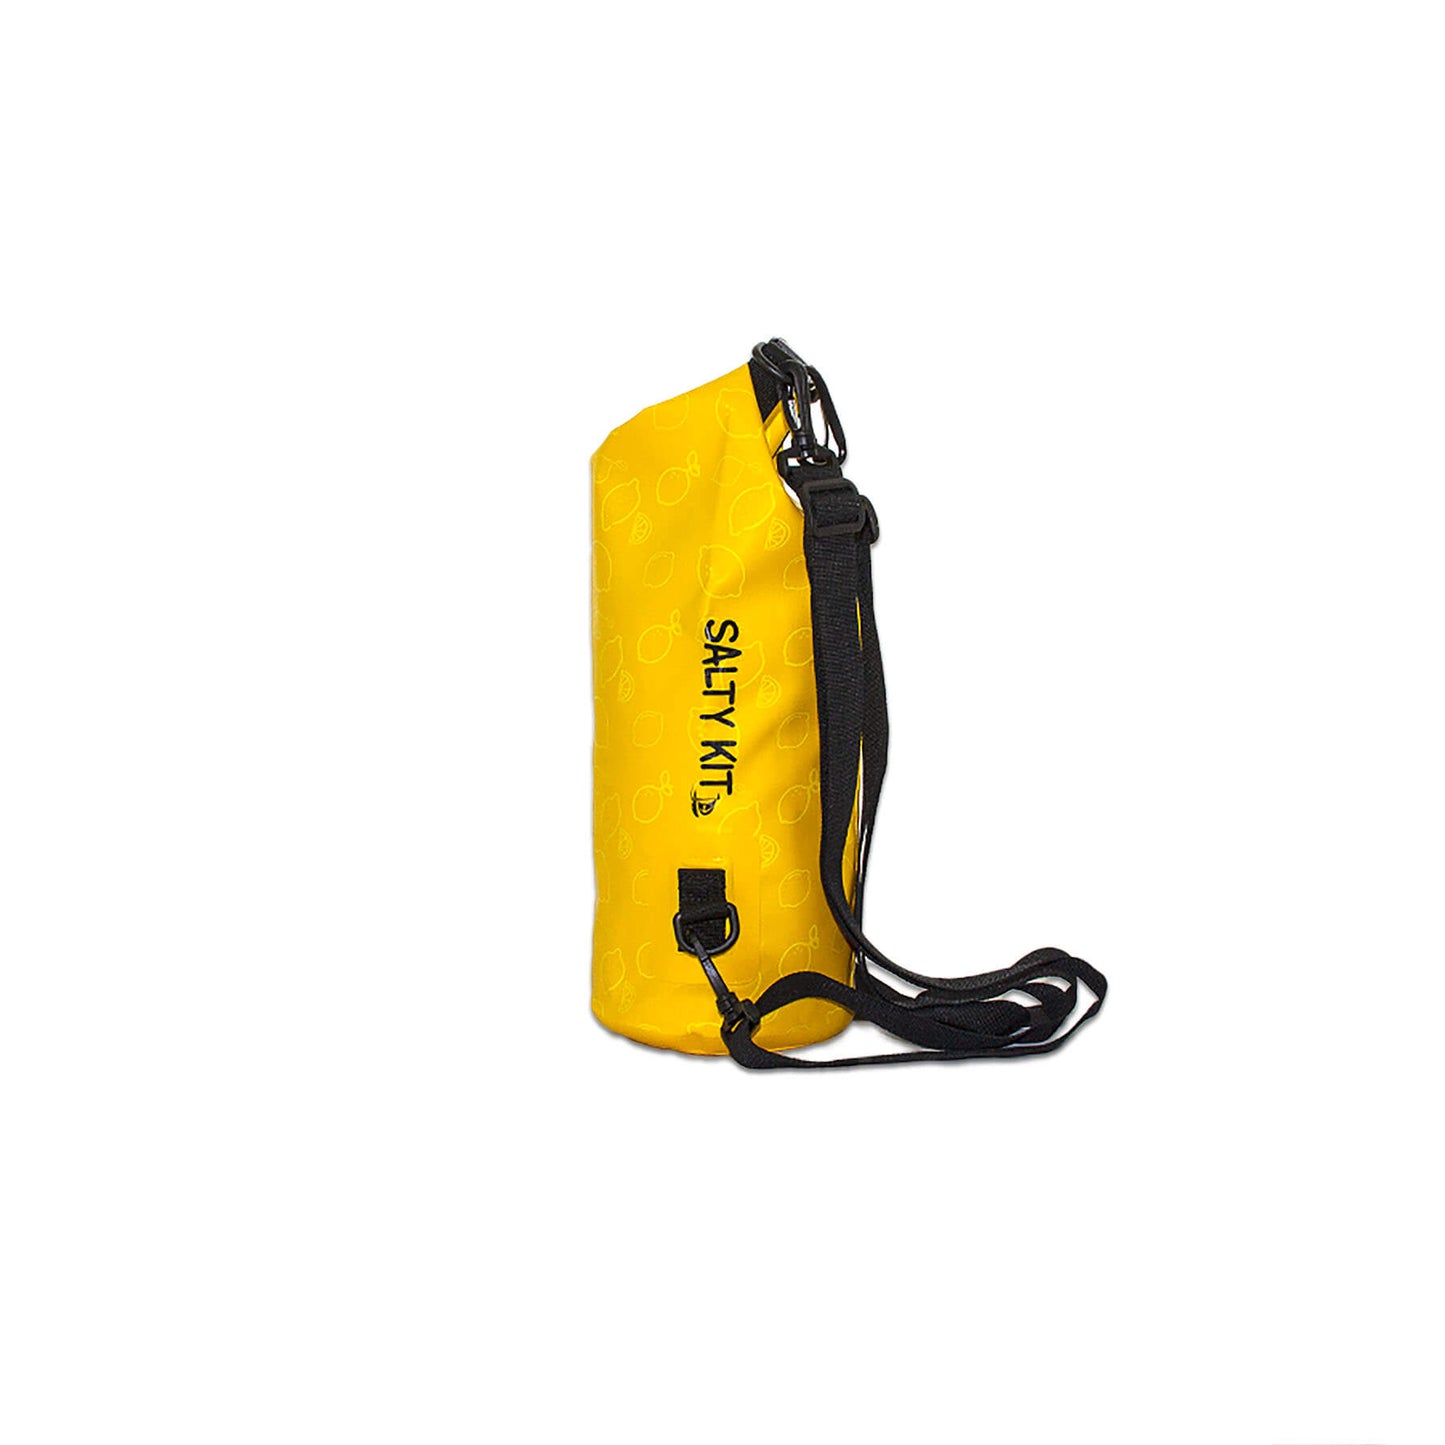 waterproof dry bag 5 litres a handy grab size with detachable straps and carabiner  lemonade side view